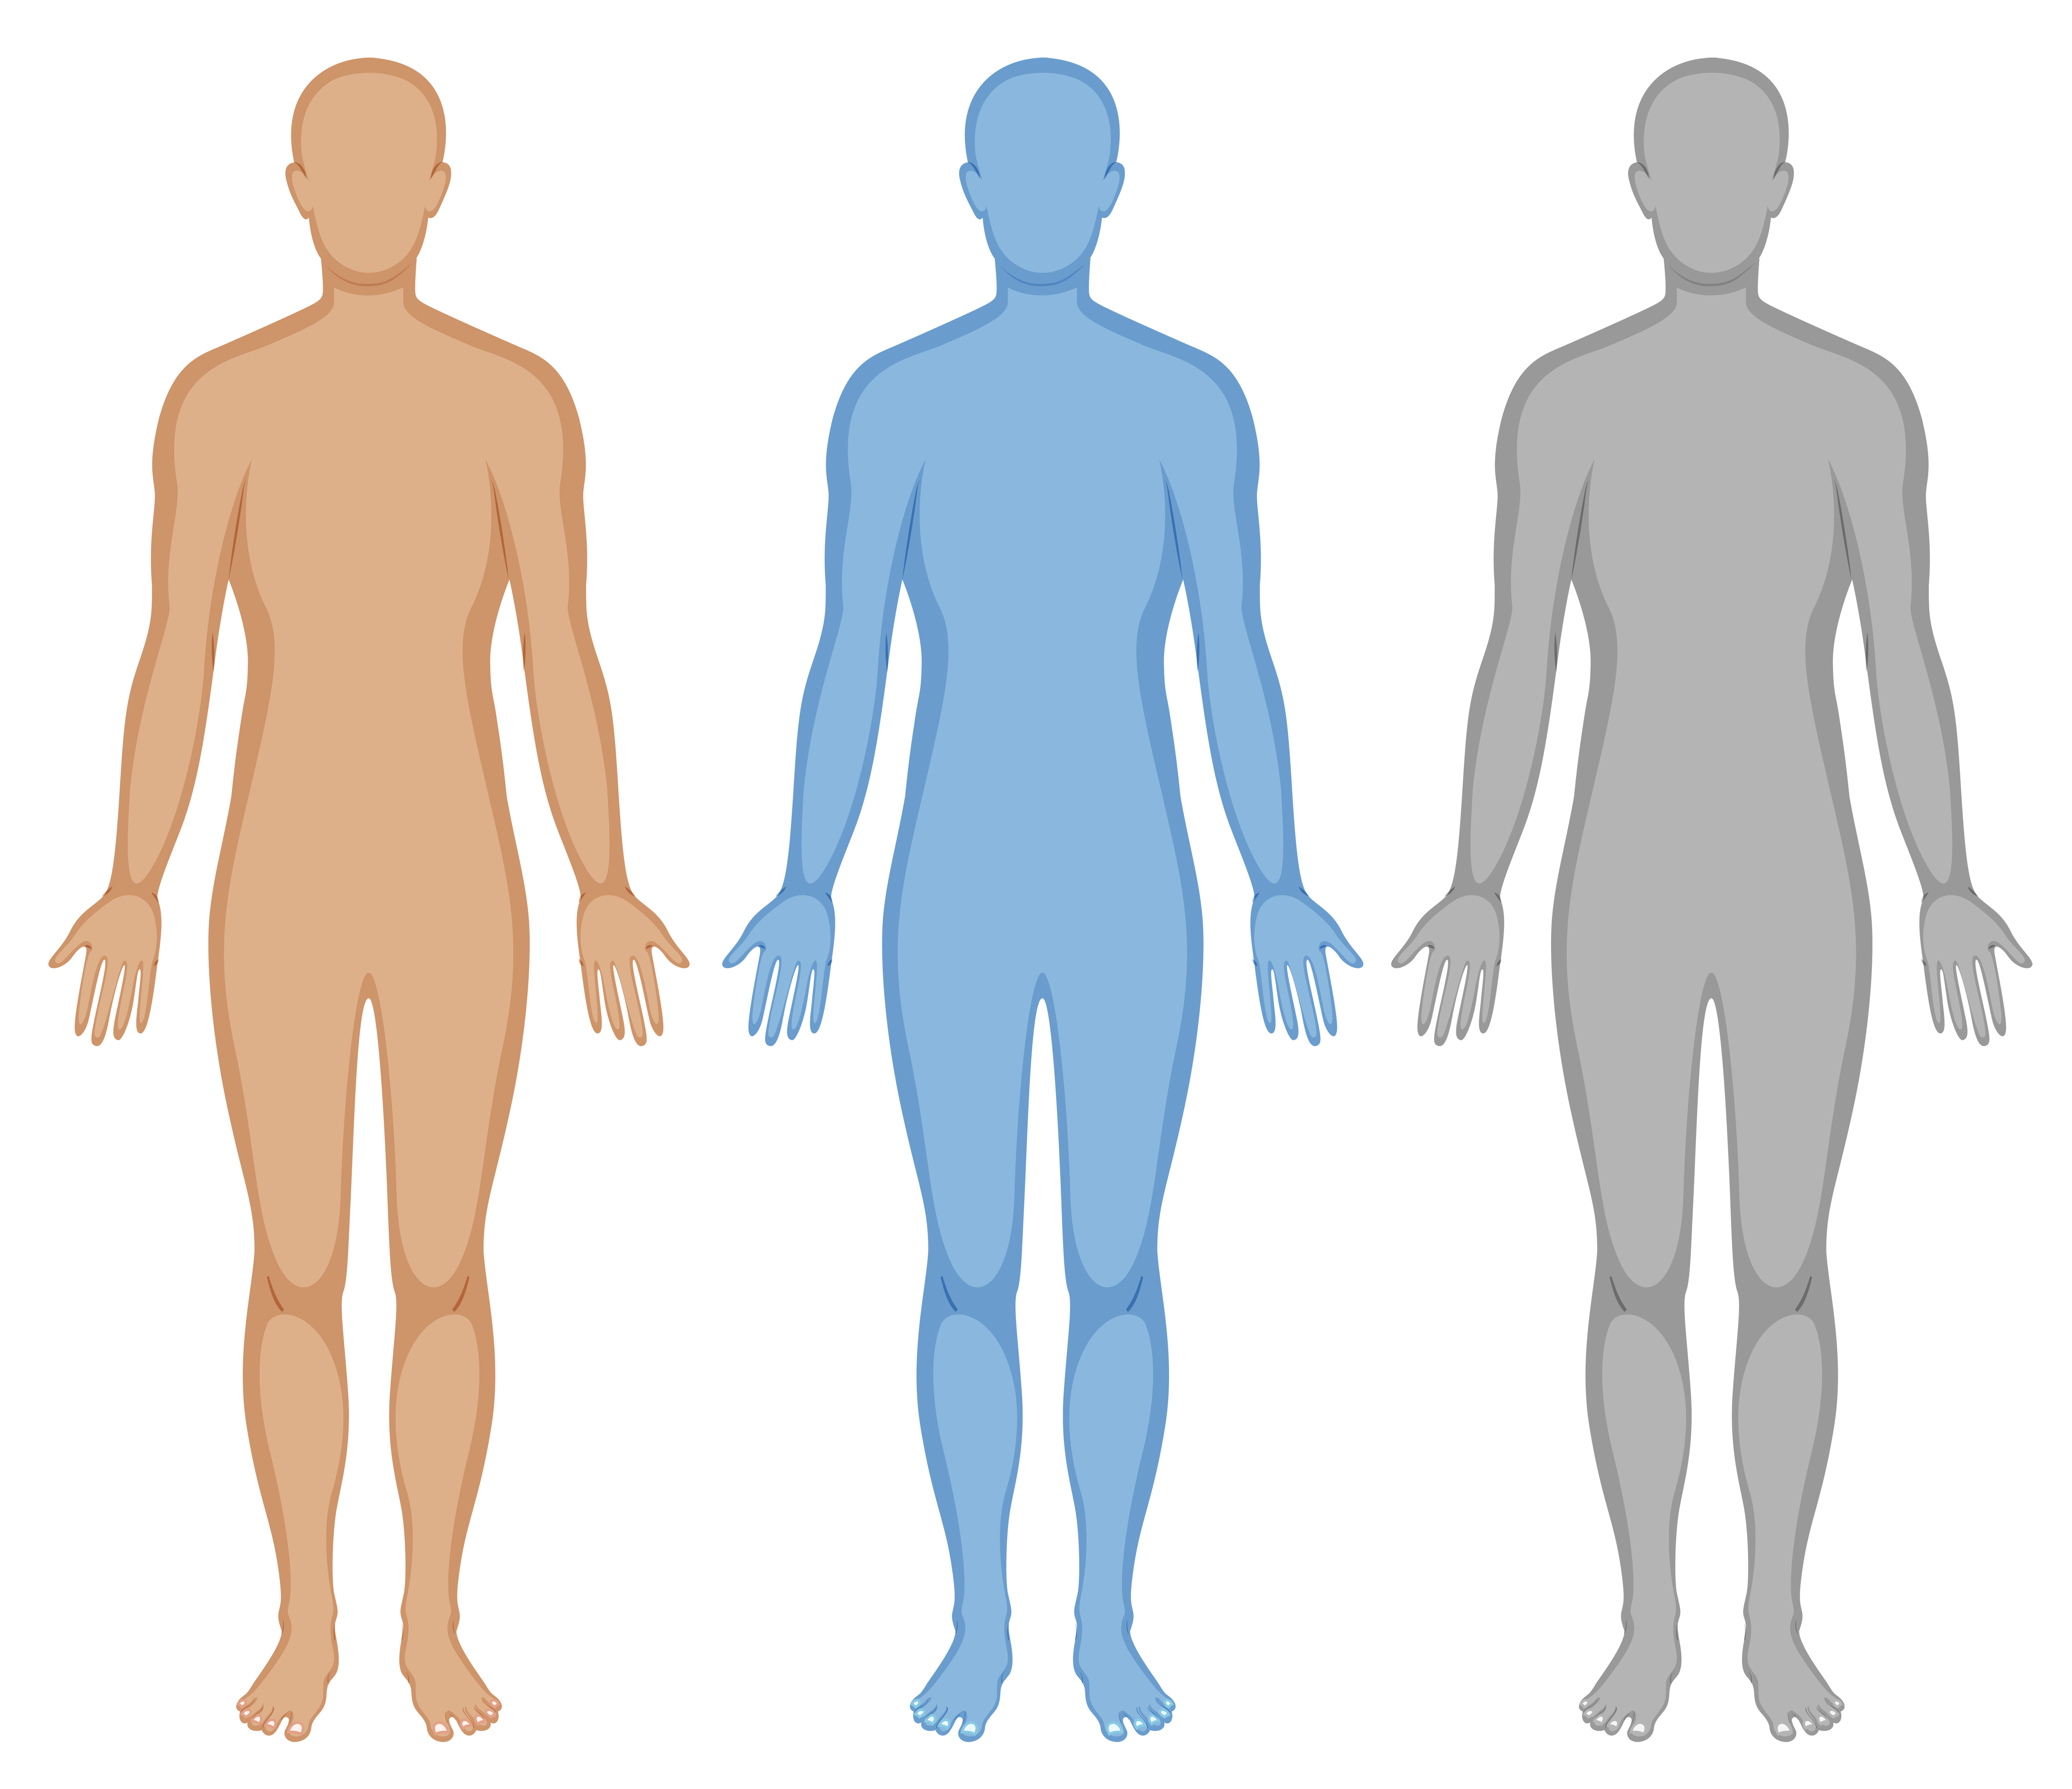 Human Body Outline Free Vector Art 226 Free Downloads You can edit any of drawings via our online image editor before downloading. vecteezy